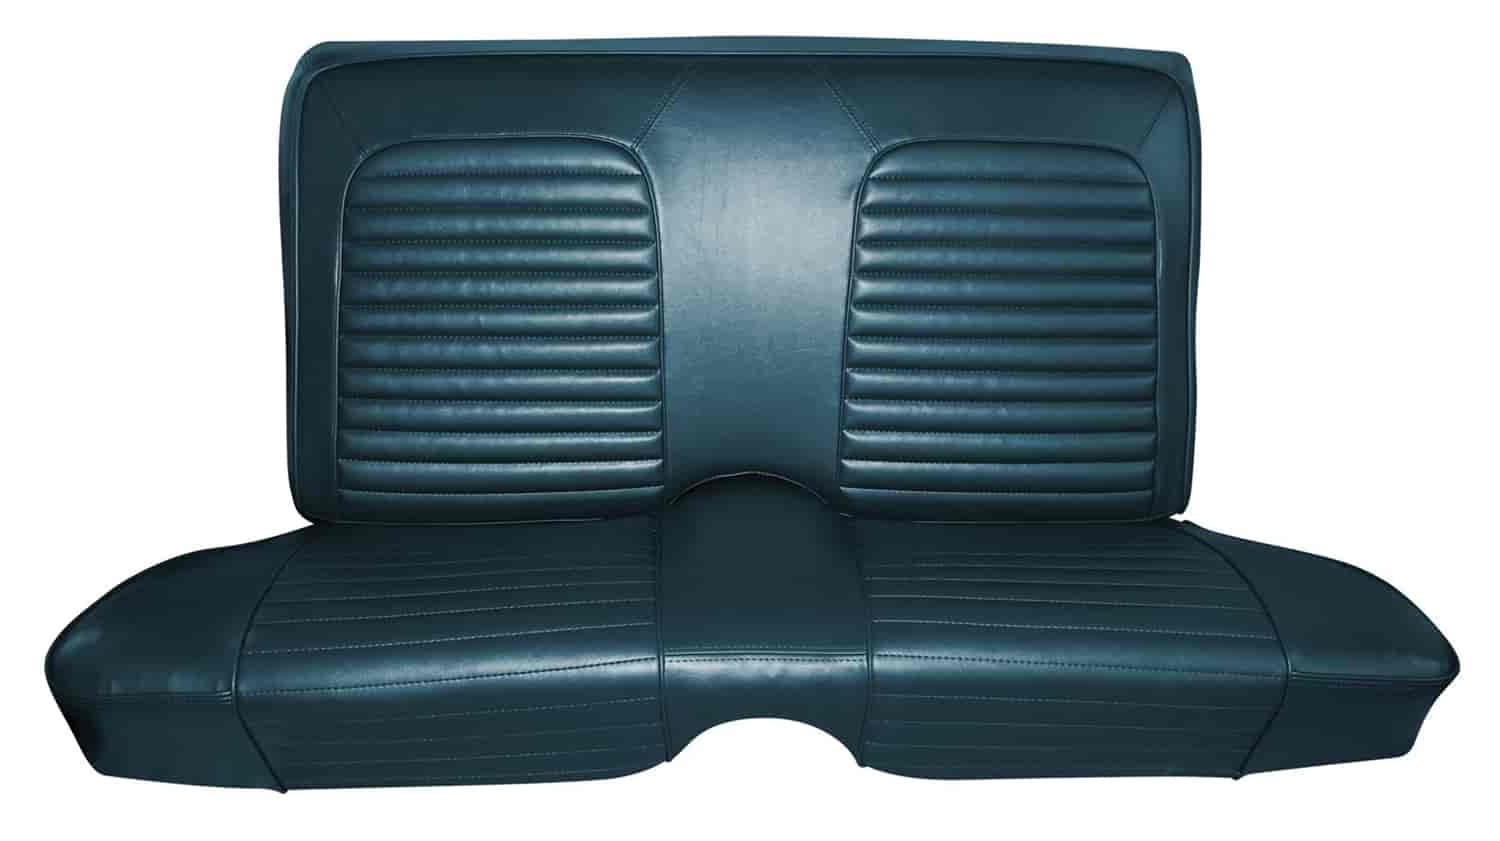 1963 Ford Falcon Futura Convertible Interior Rear Bench Seat Upholstery for Vehicles with a Front Bench Seat